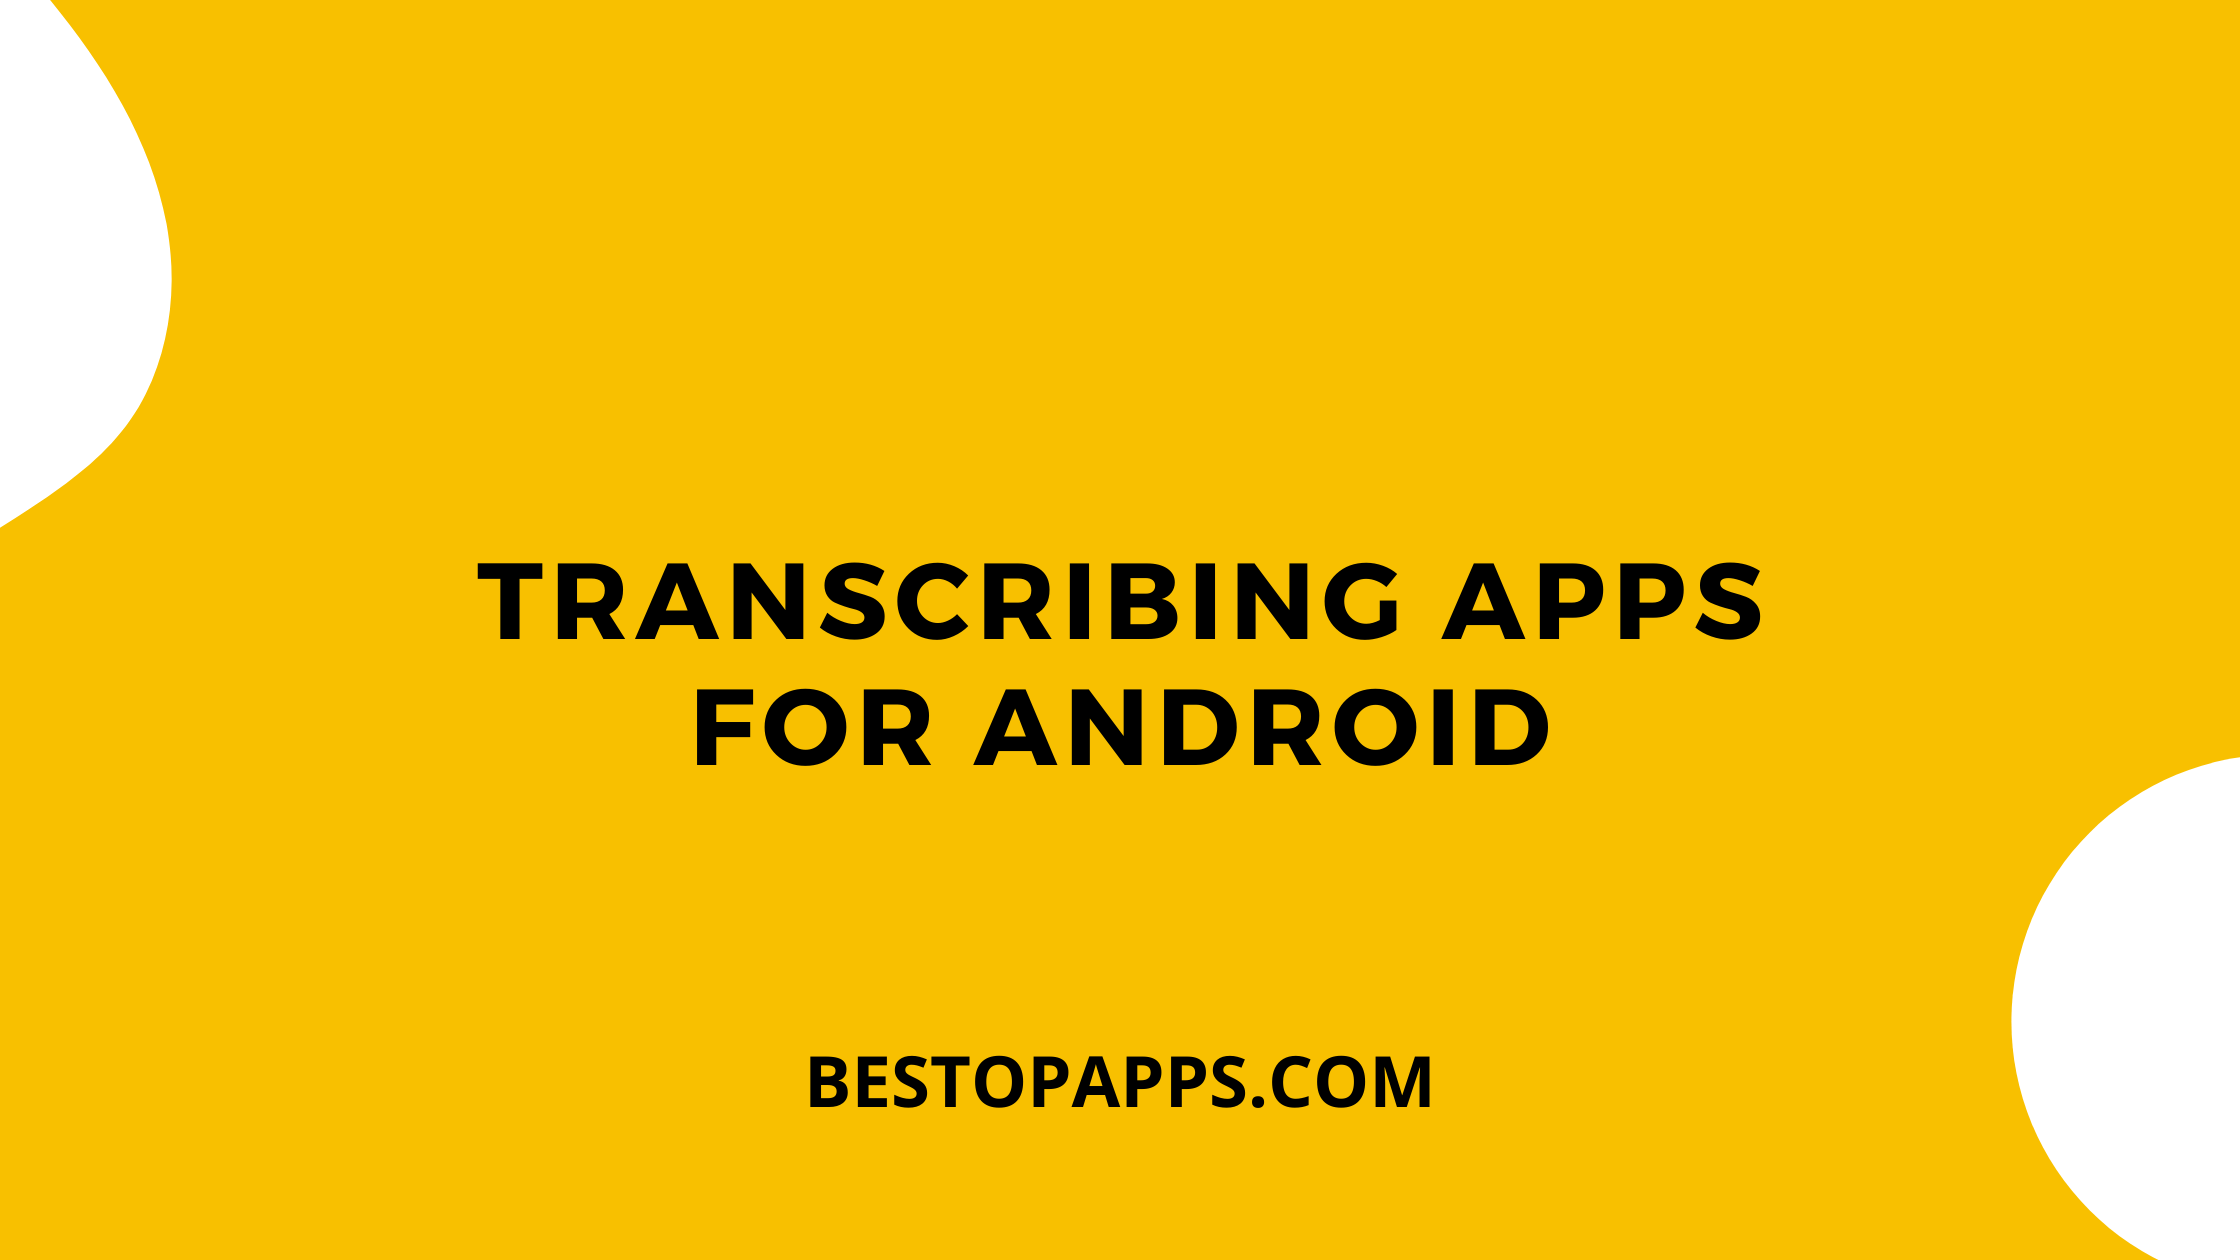 Transcribing Apps for Android